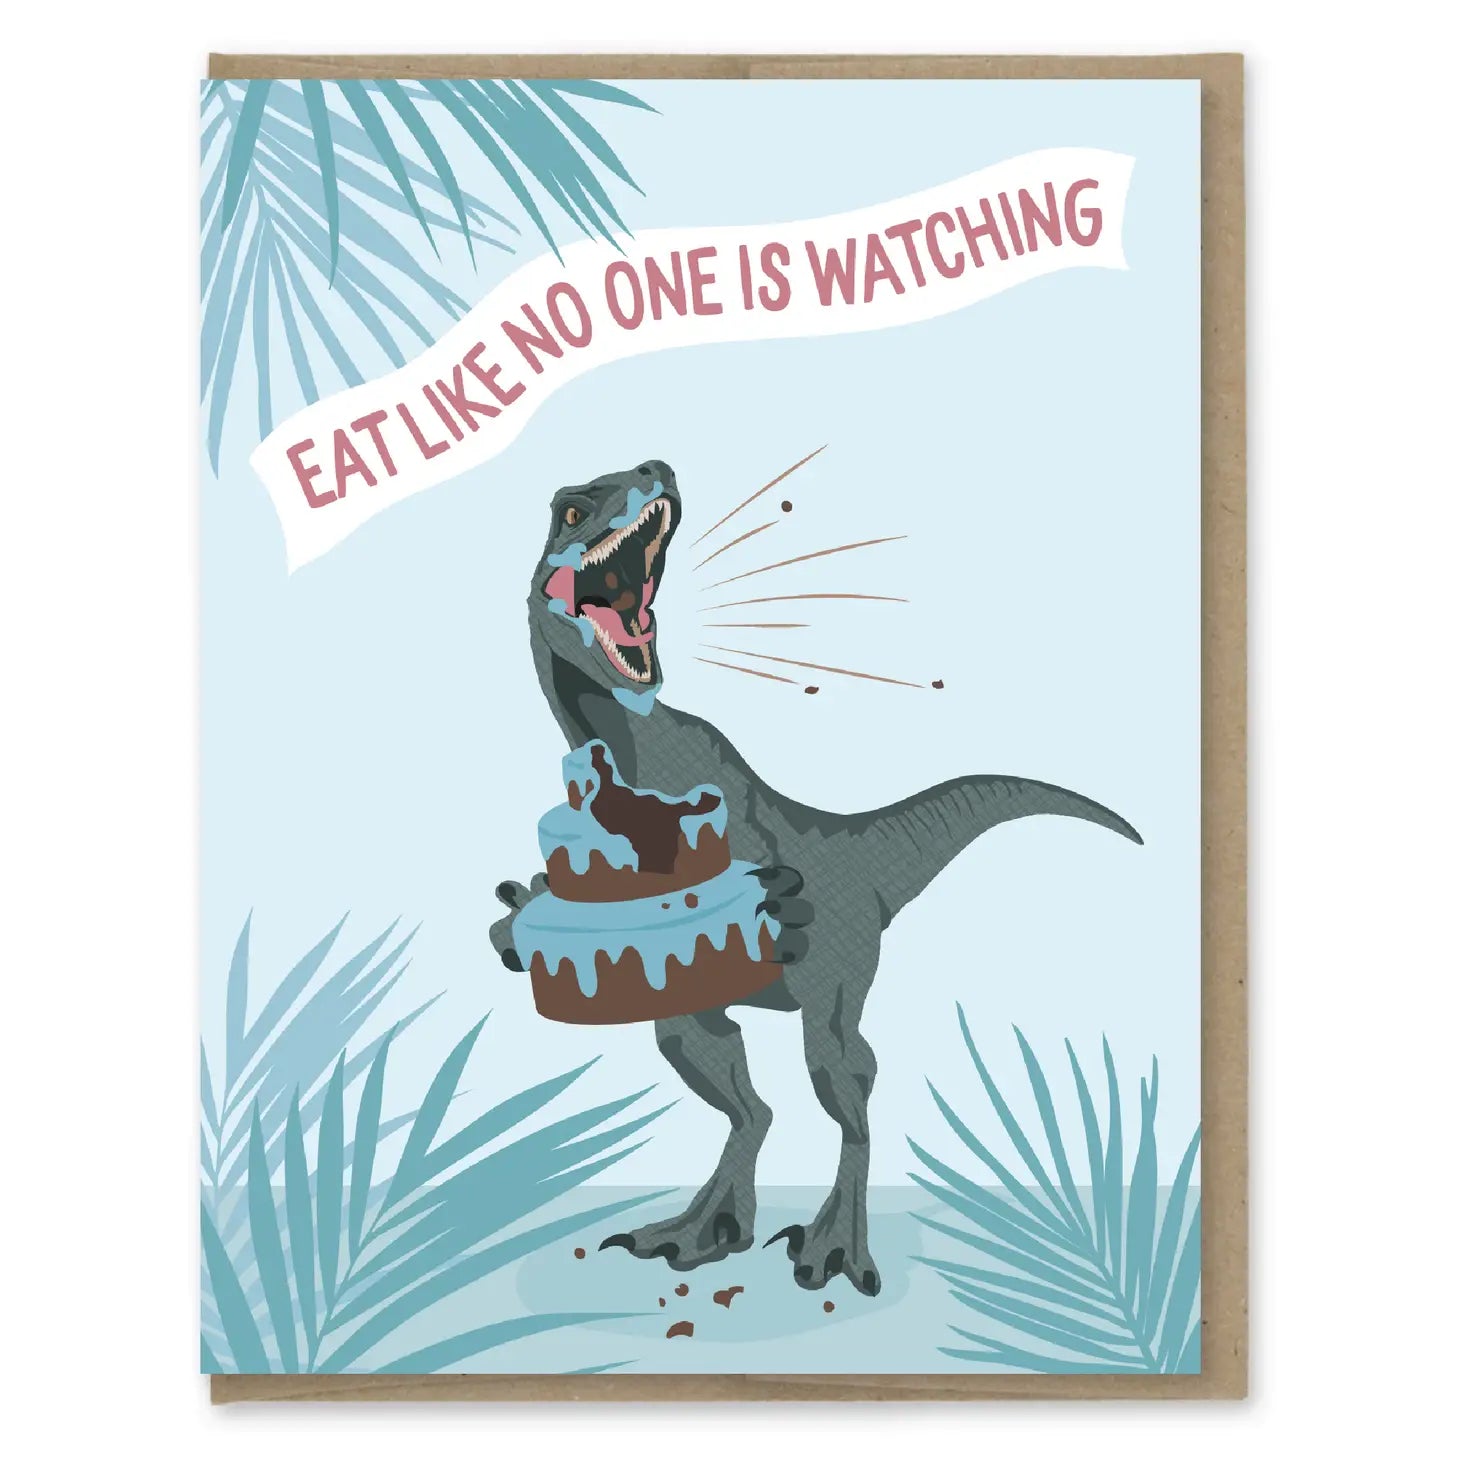 Modern Printed Matter “Eat Like No One is Watching” Card